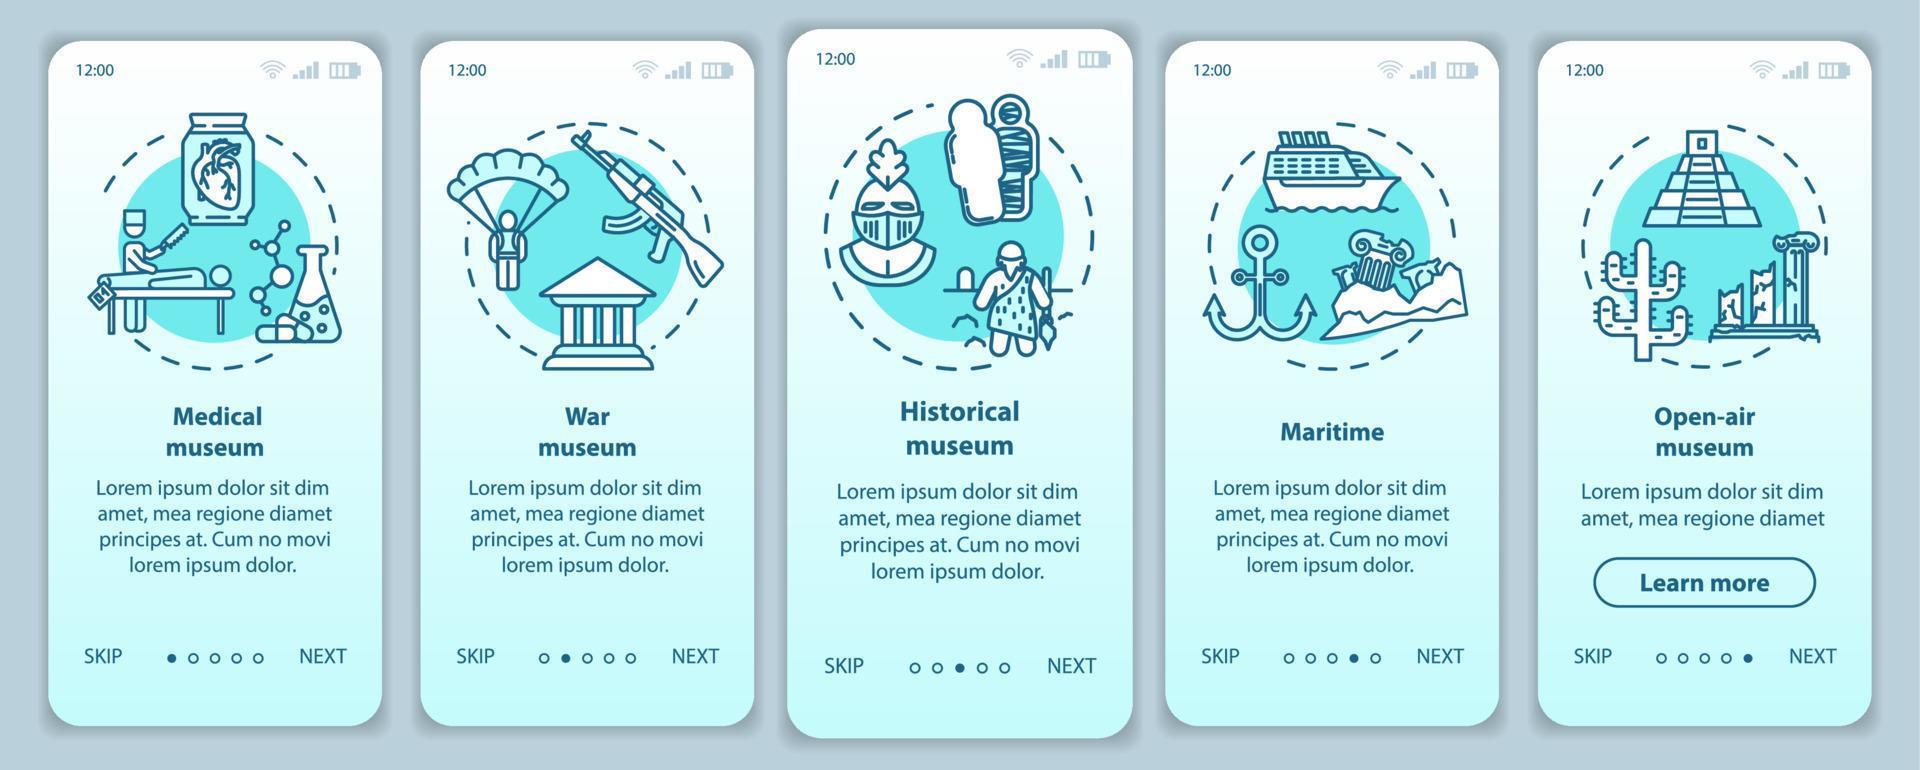 Exhibition and museum onboarding mobile app page screen vector template. Open-air exposition. Walkthrough website steps with linear illustrations. UX, UI, GUI smartphone interface concept